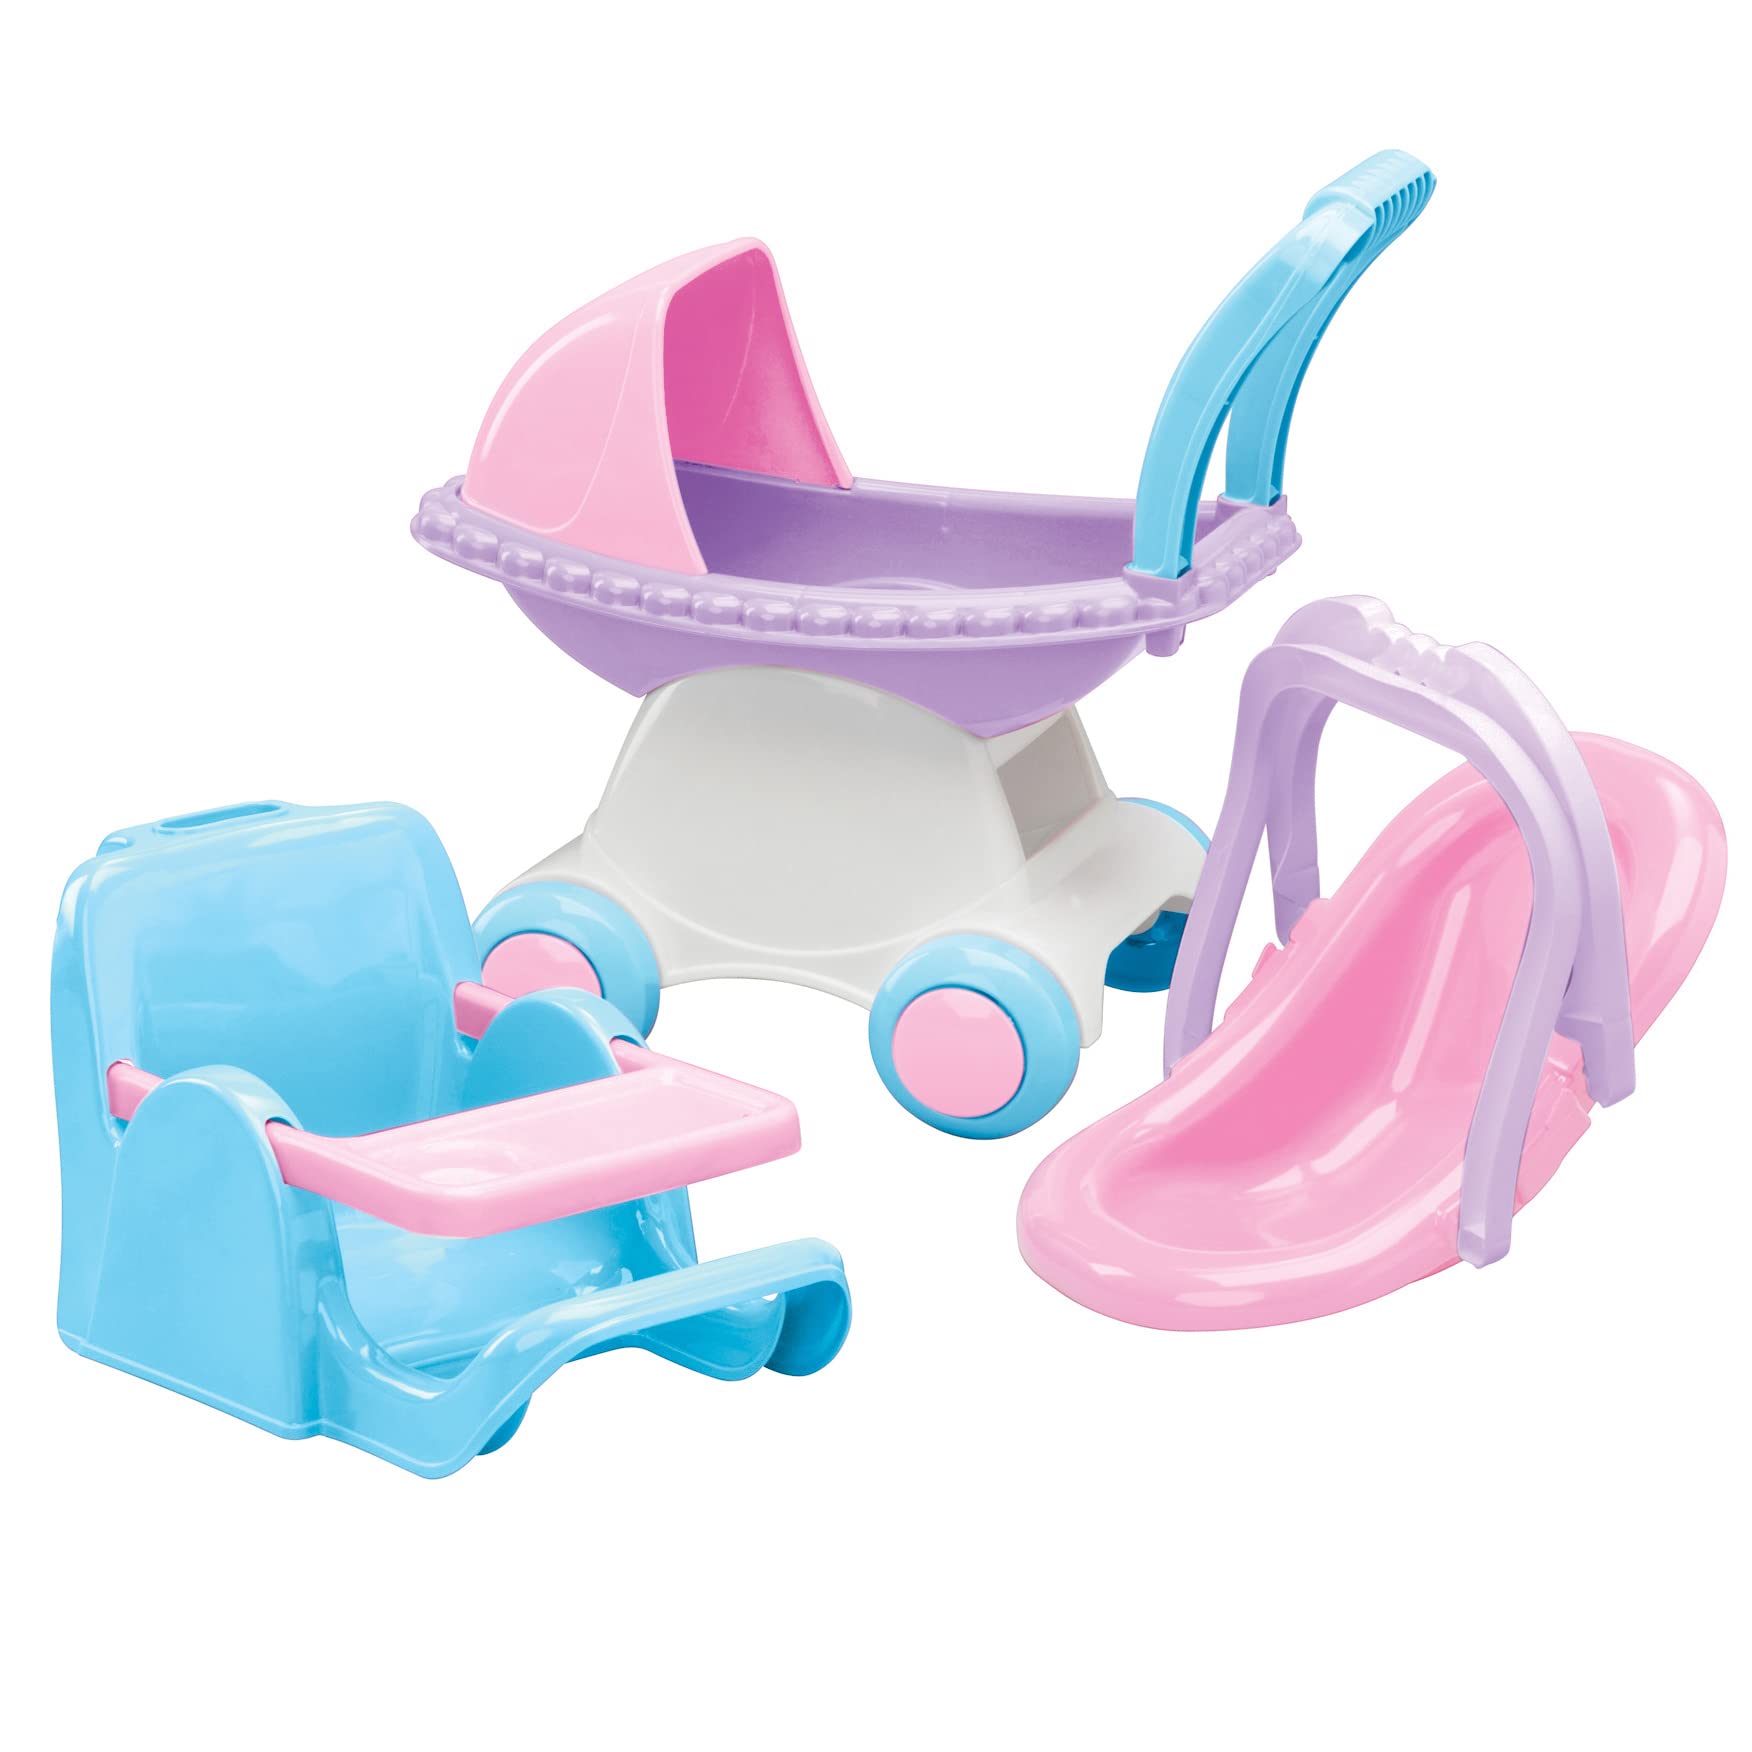 American Plastic Toys 3-Piece Baby Doll Playset, Buggy, Carrier, Clip Chair Converts To Feeding Chair, Role Play, Learn To Care